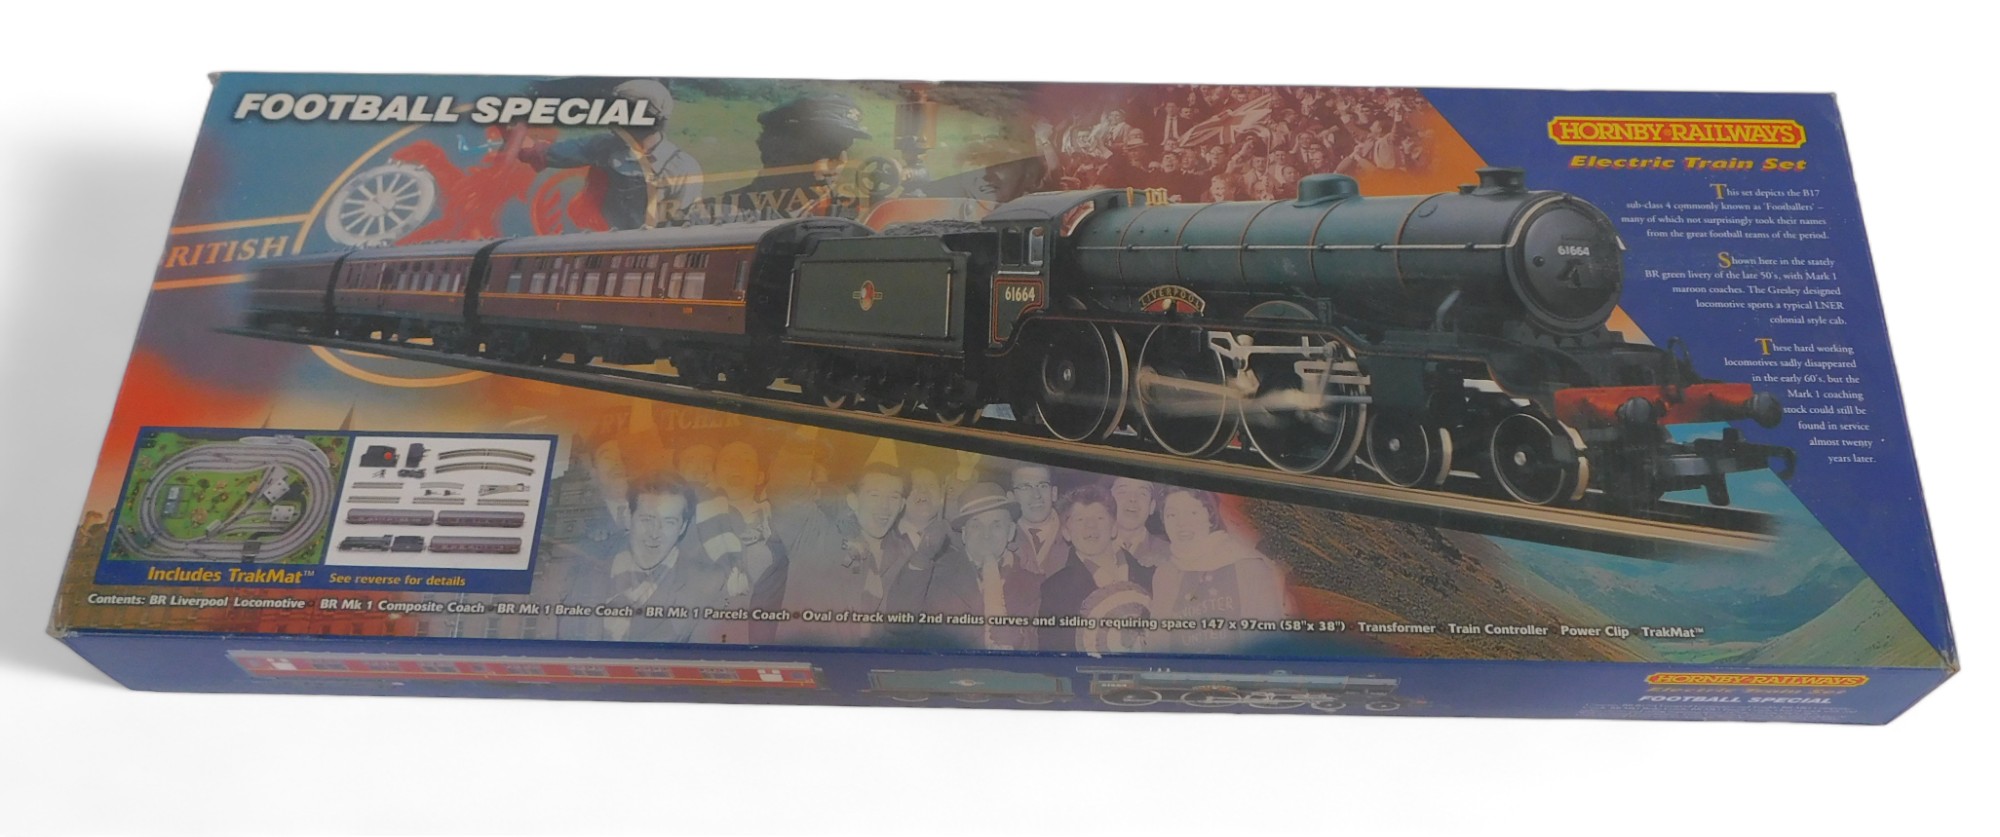 A Hornby OO gauge train set R1007 Football Special, boxed.